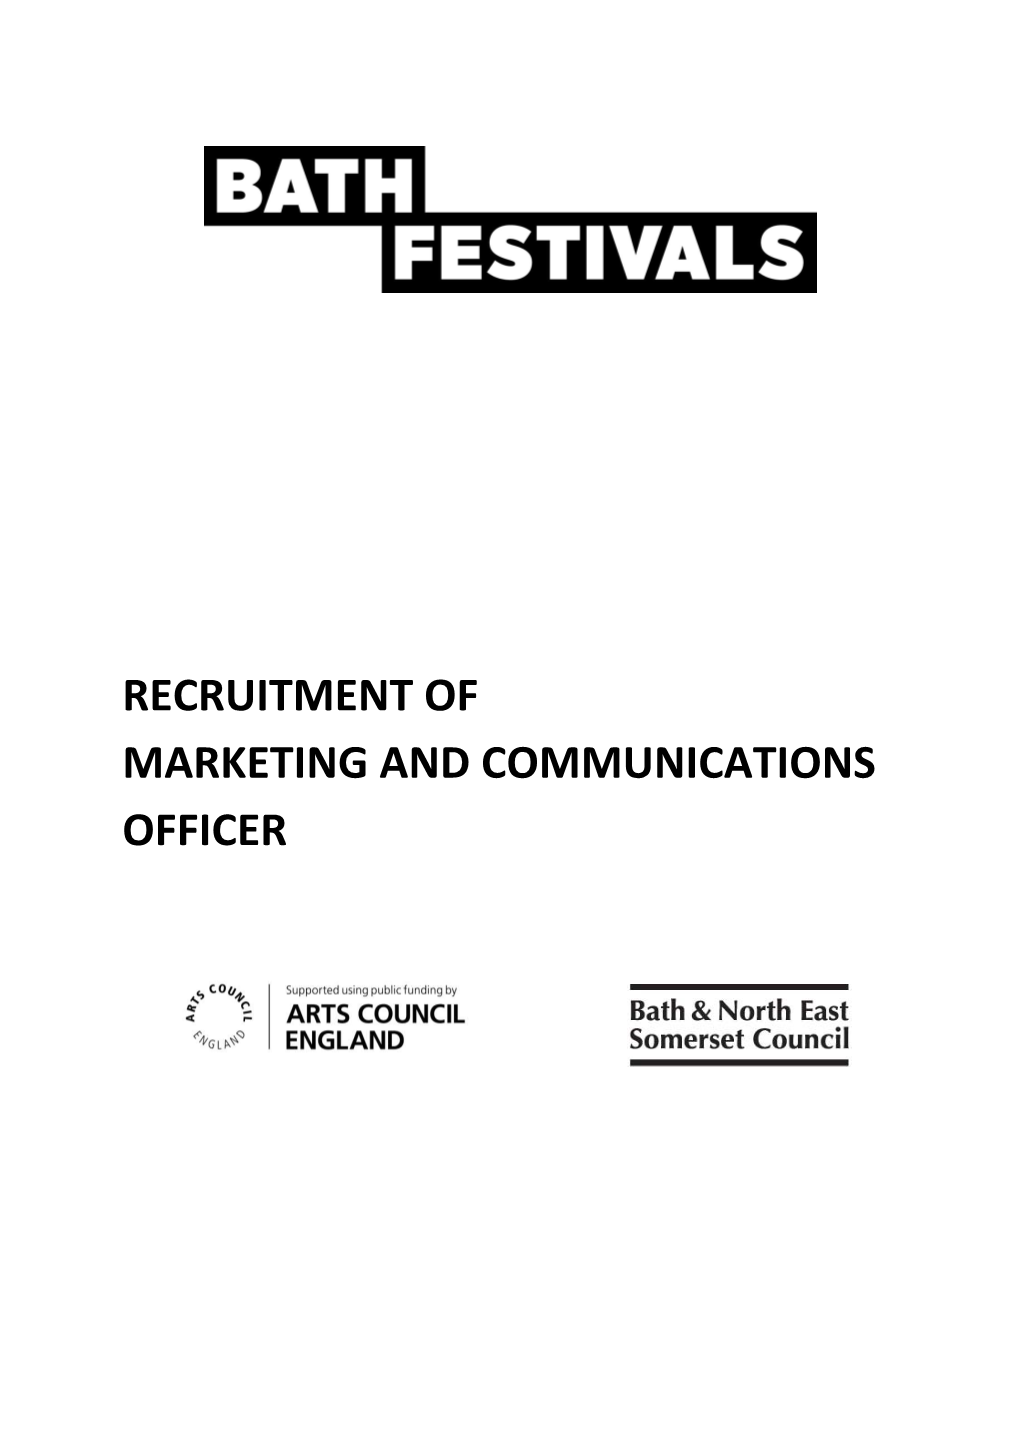 Recruitment of Marketing and Communications Officer